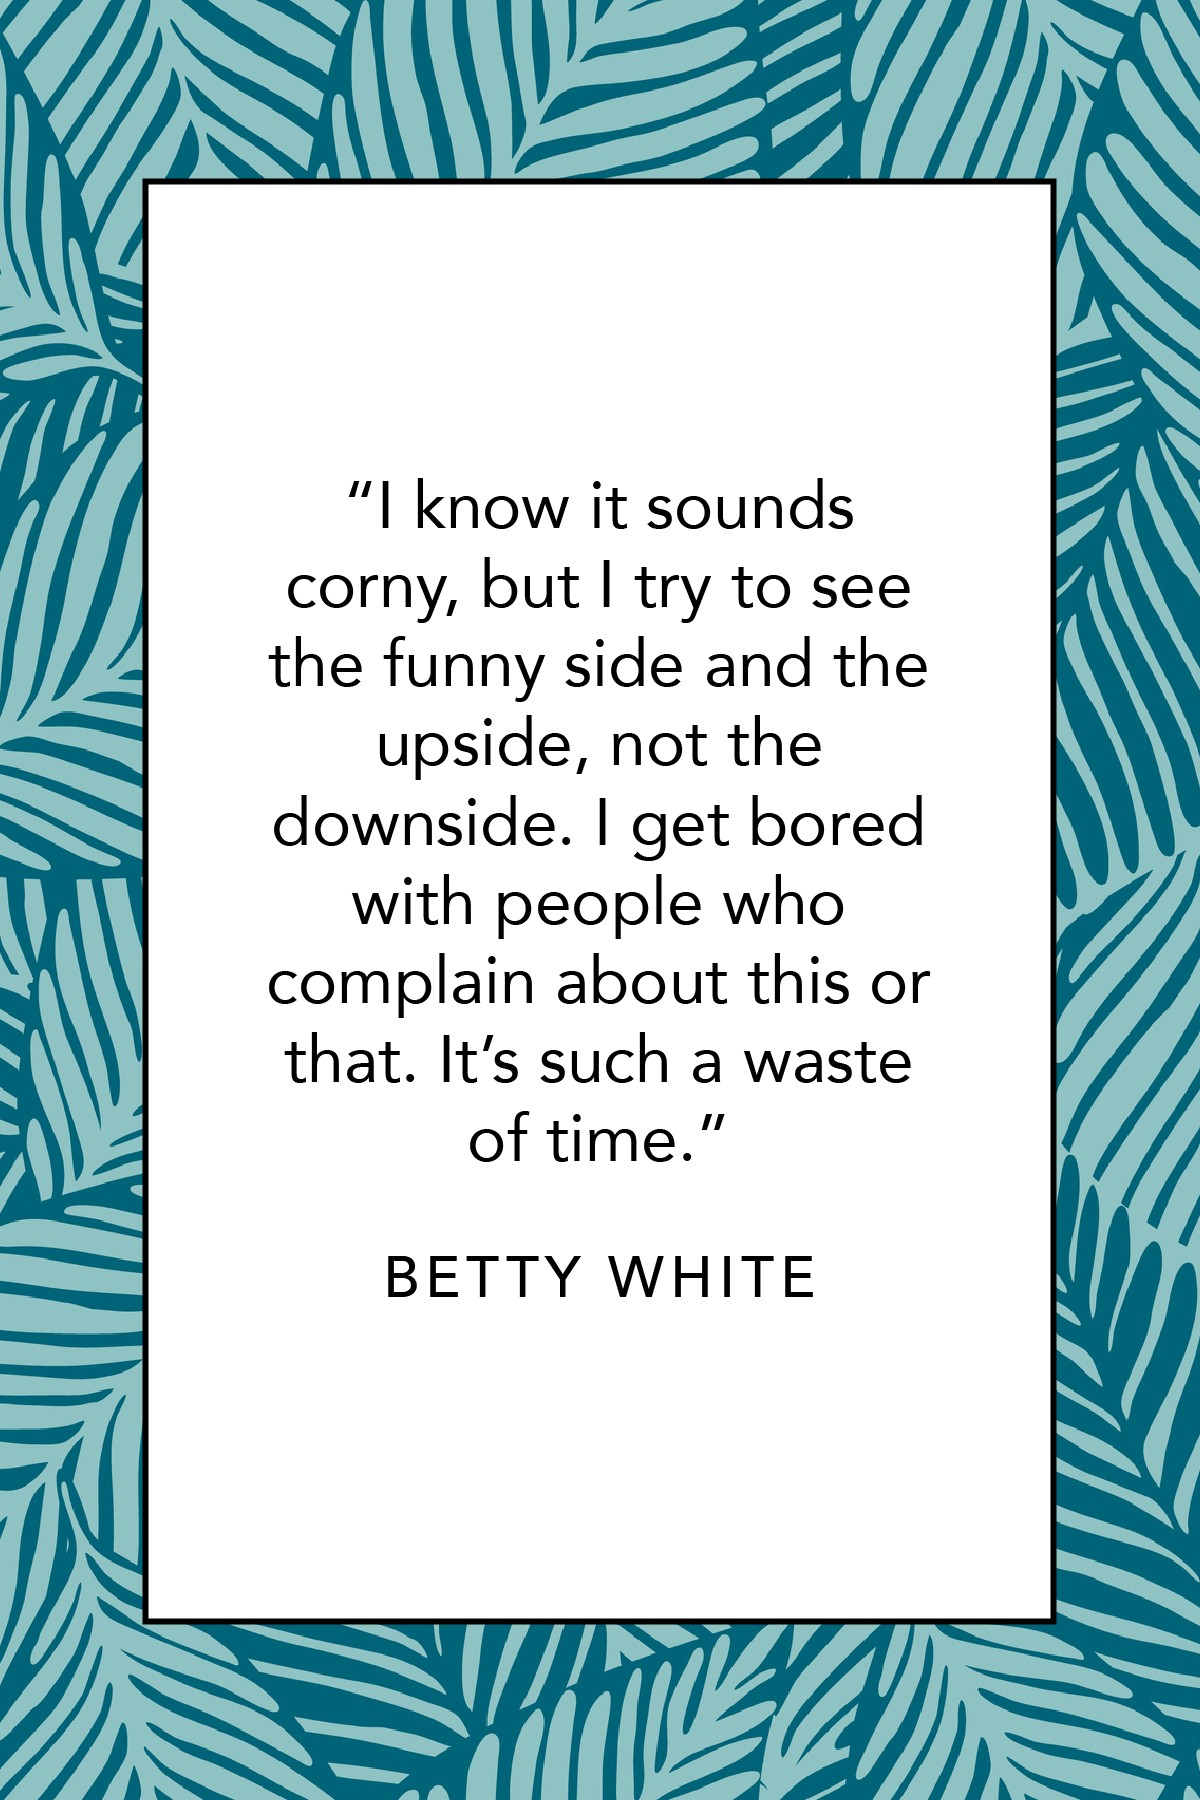 funny white people quotes